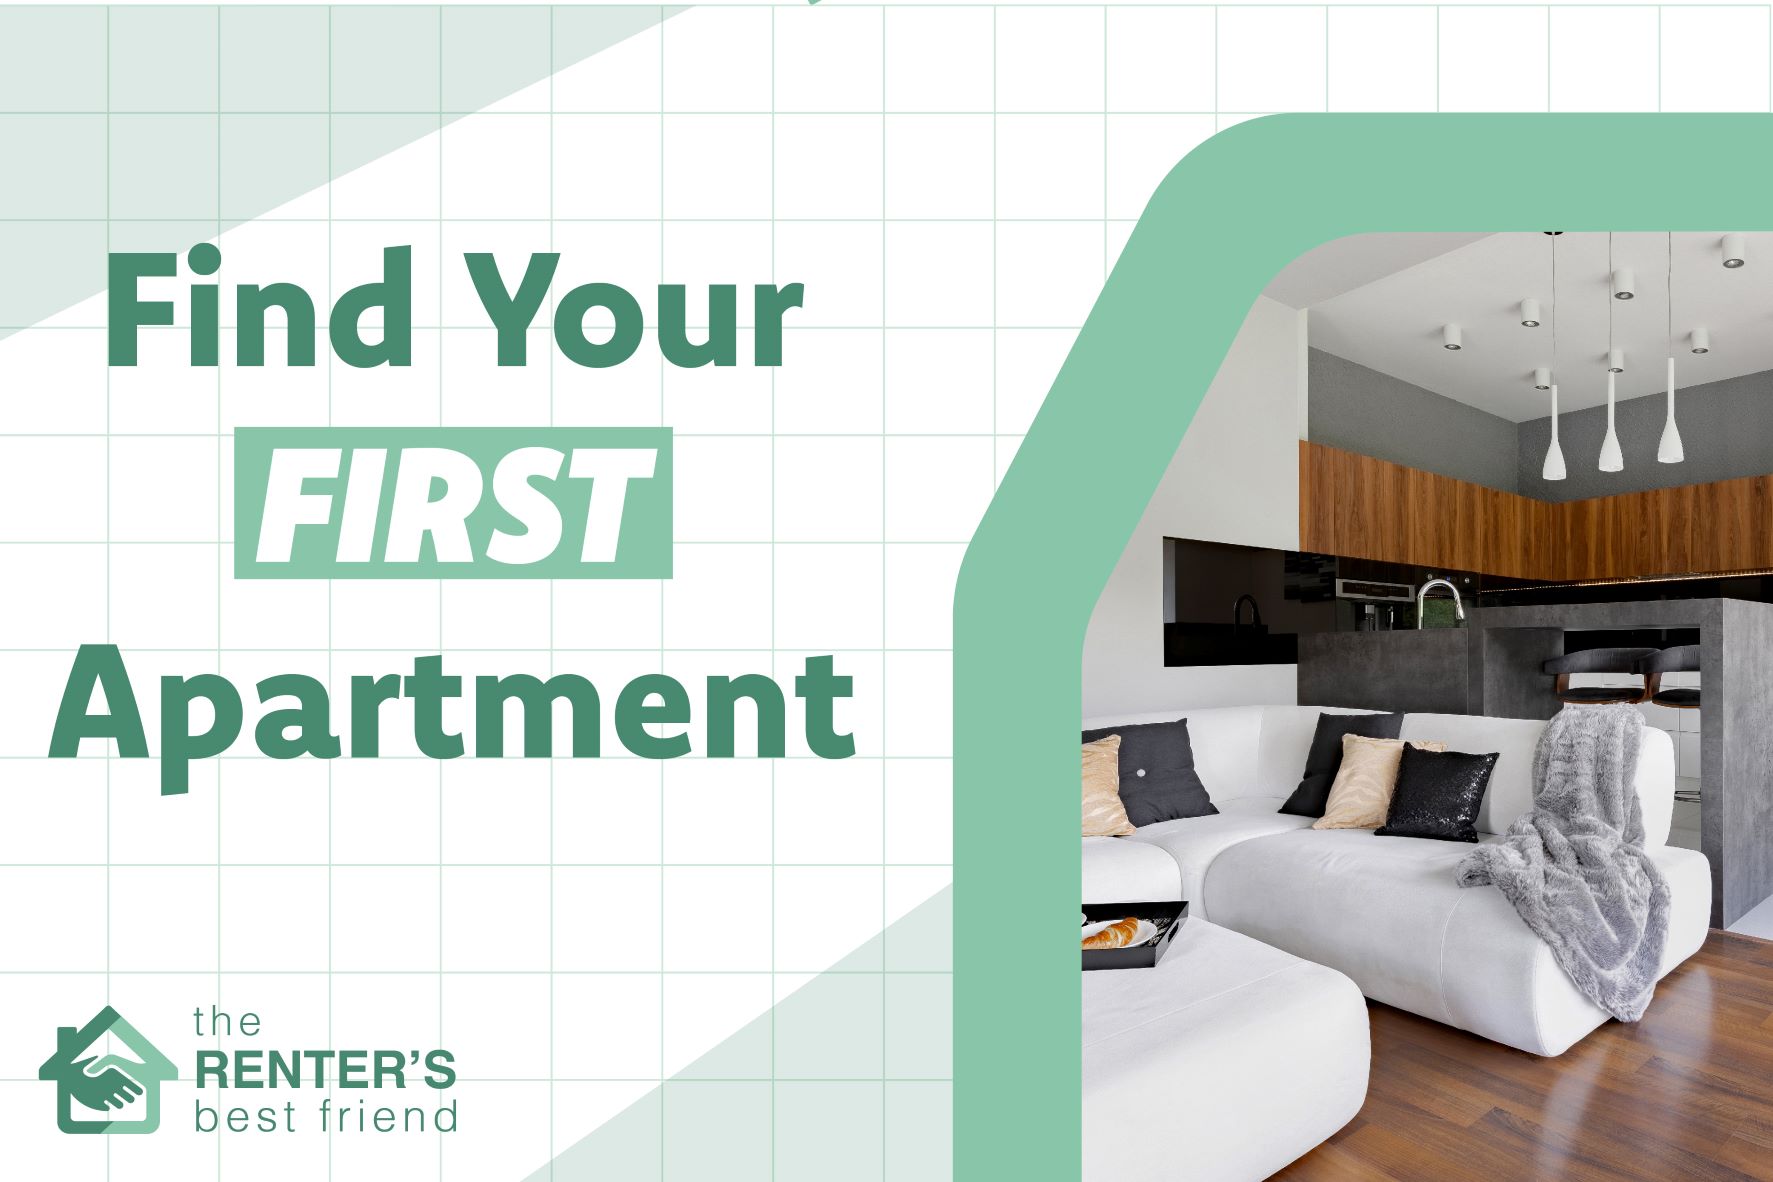 Find your first apartment